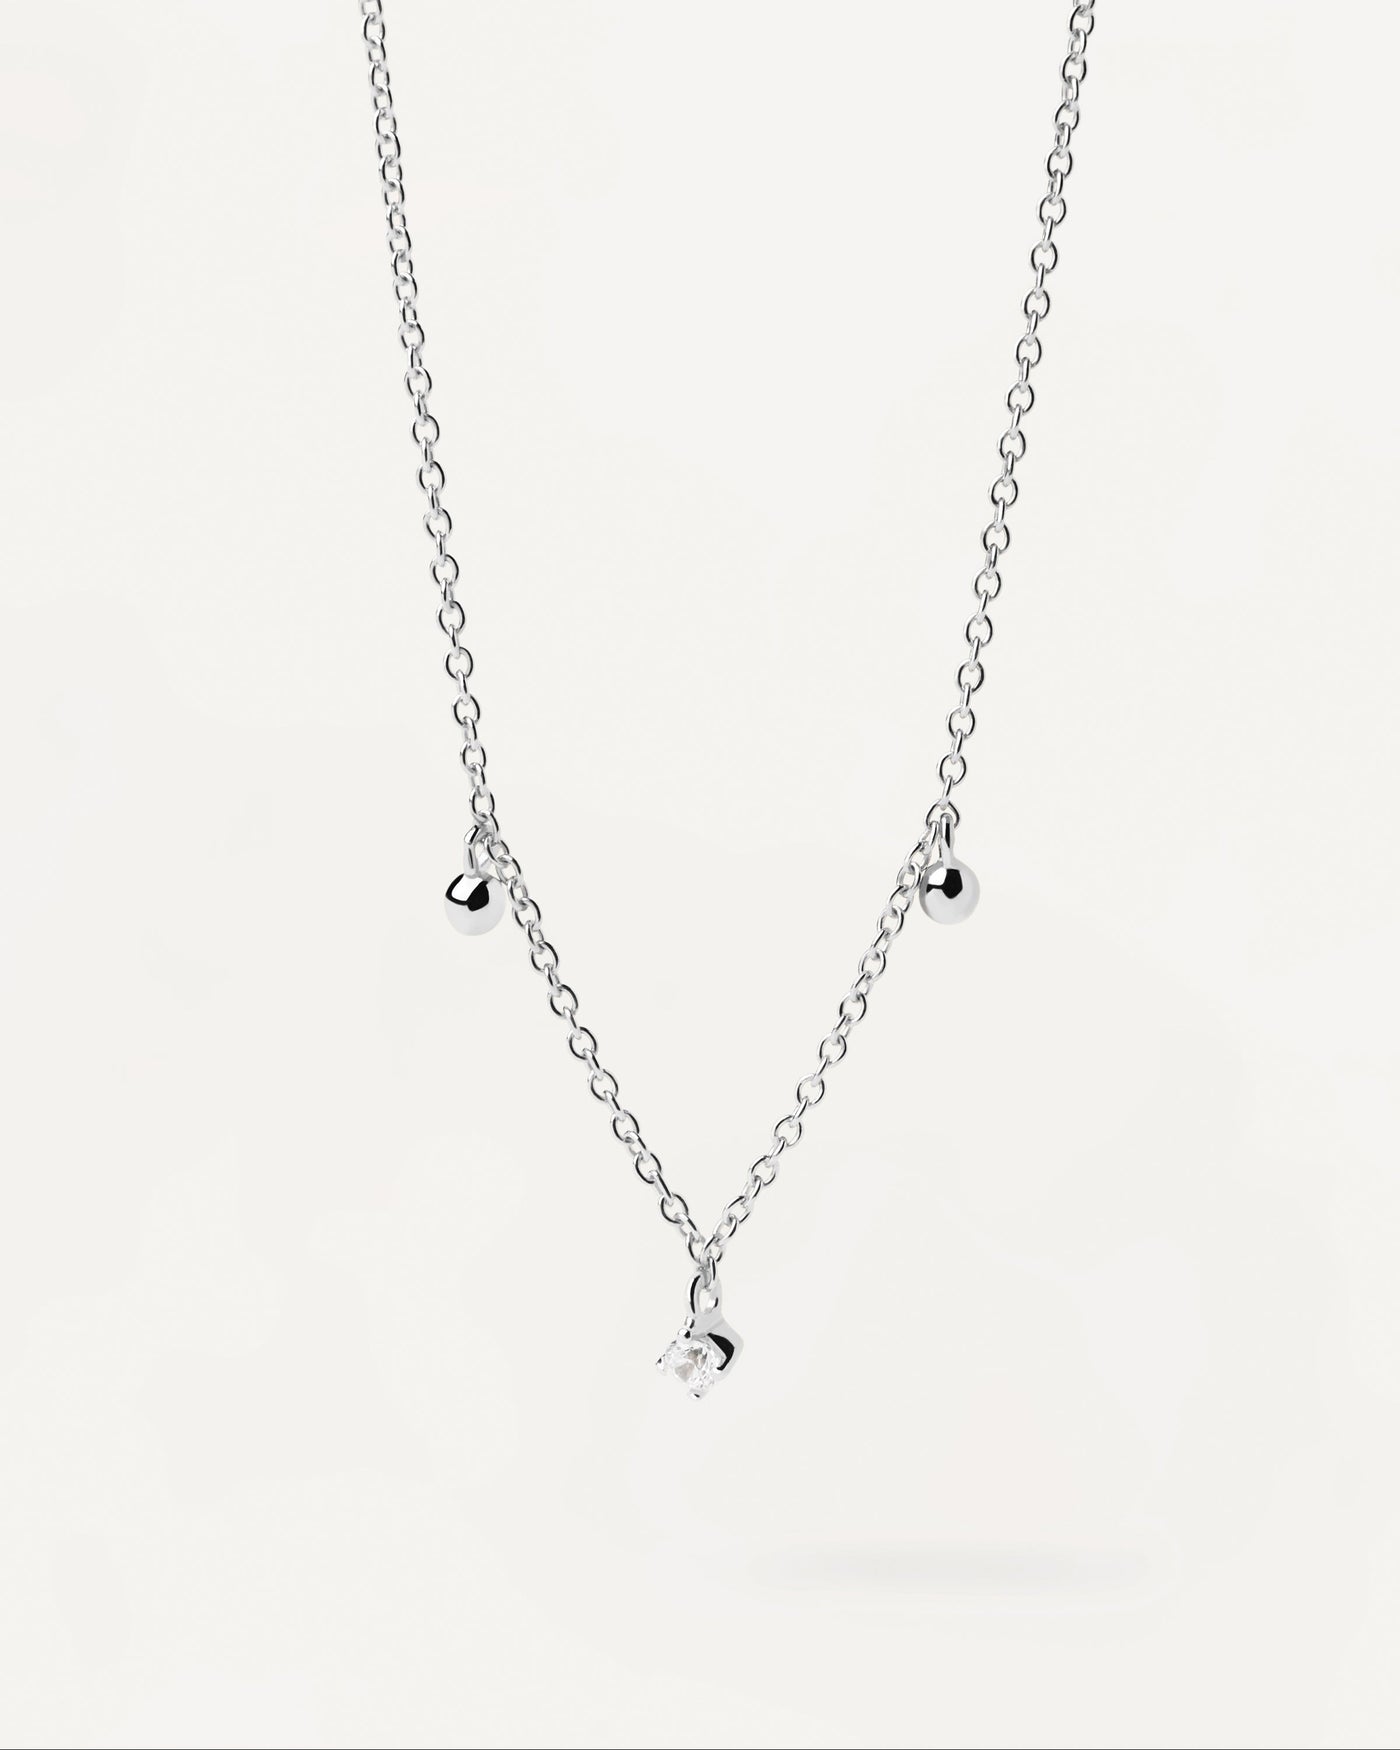 2023 Selection | Love Triangle Silver Necklace. Large link necklace in sterling silver set with white zirconia. Get the latest arrival from PDPAOLA. Place your order safely and get this Best Seller. Free Shipping.